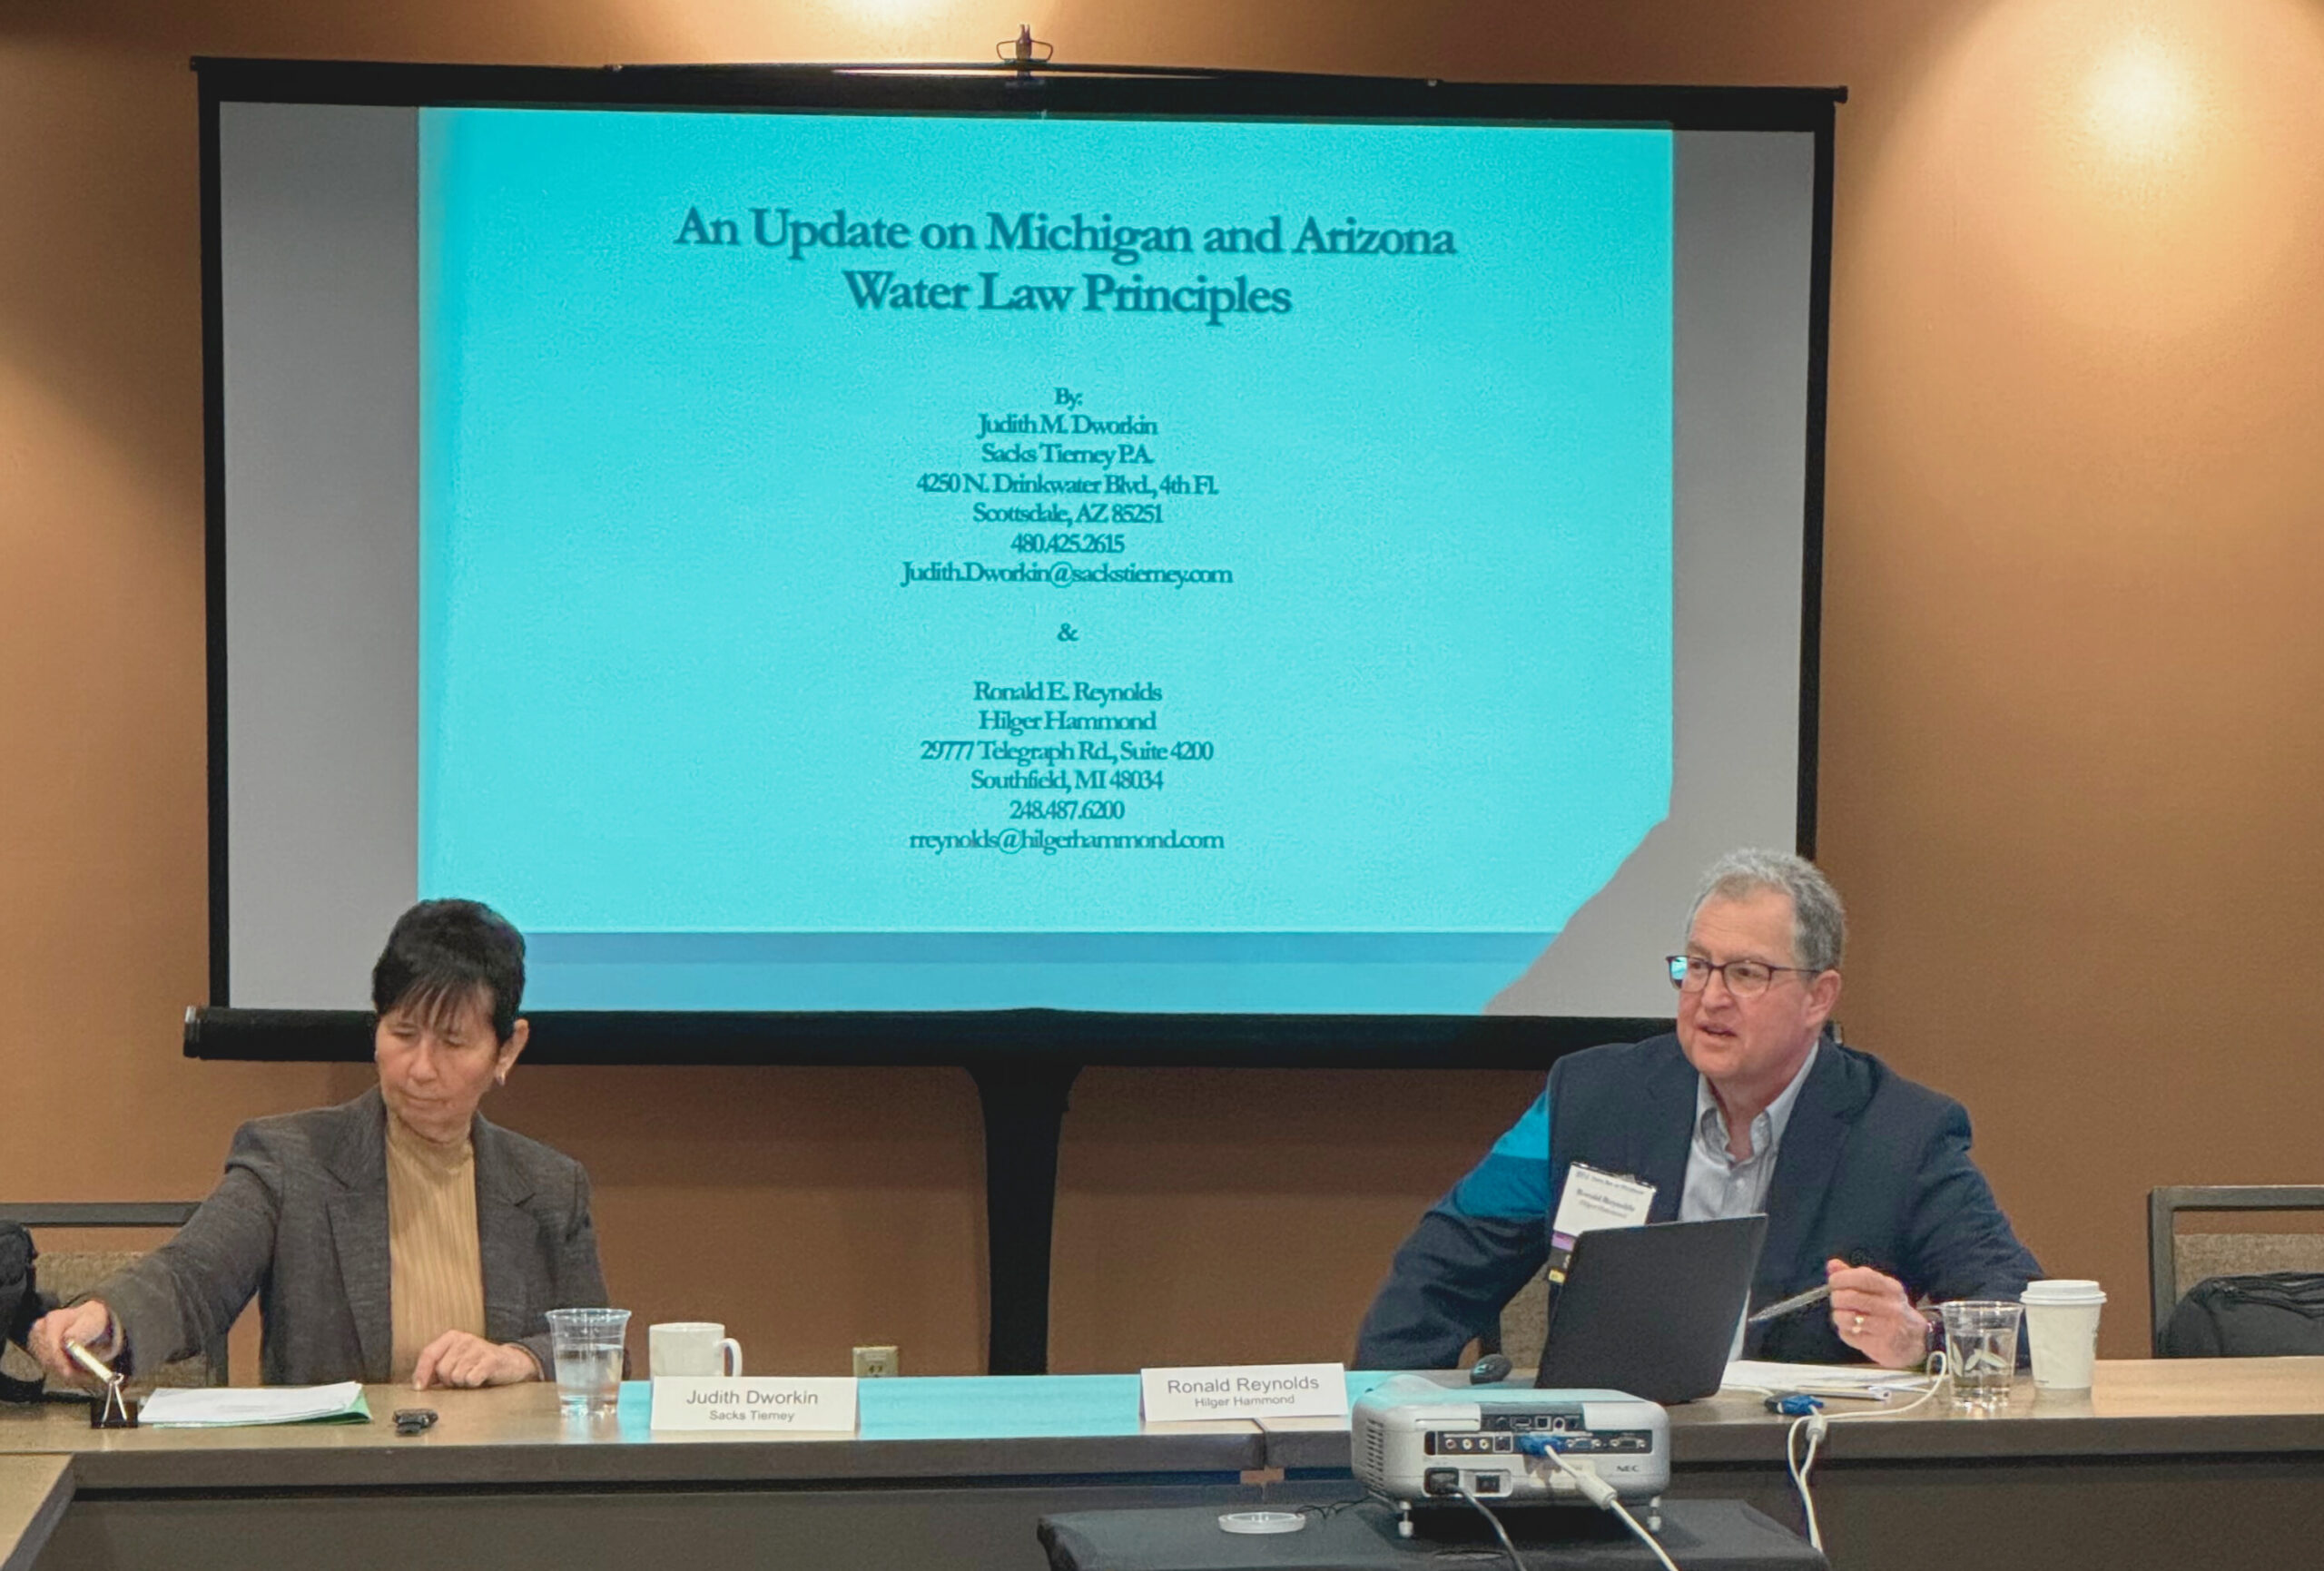 Hilger Hammond Lawyer Ron Reynolds presenting with Phoenix based lawyer Judith Dworkin on water law principles at Arizona's 2024 Real Property Law Section Conference.